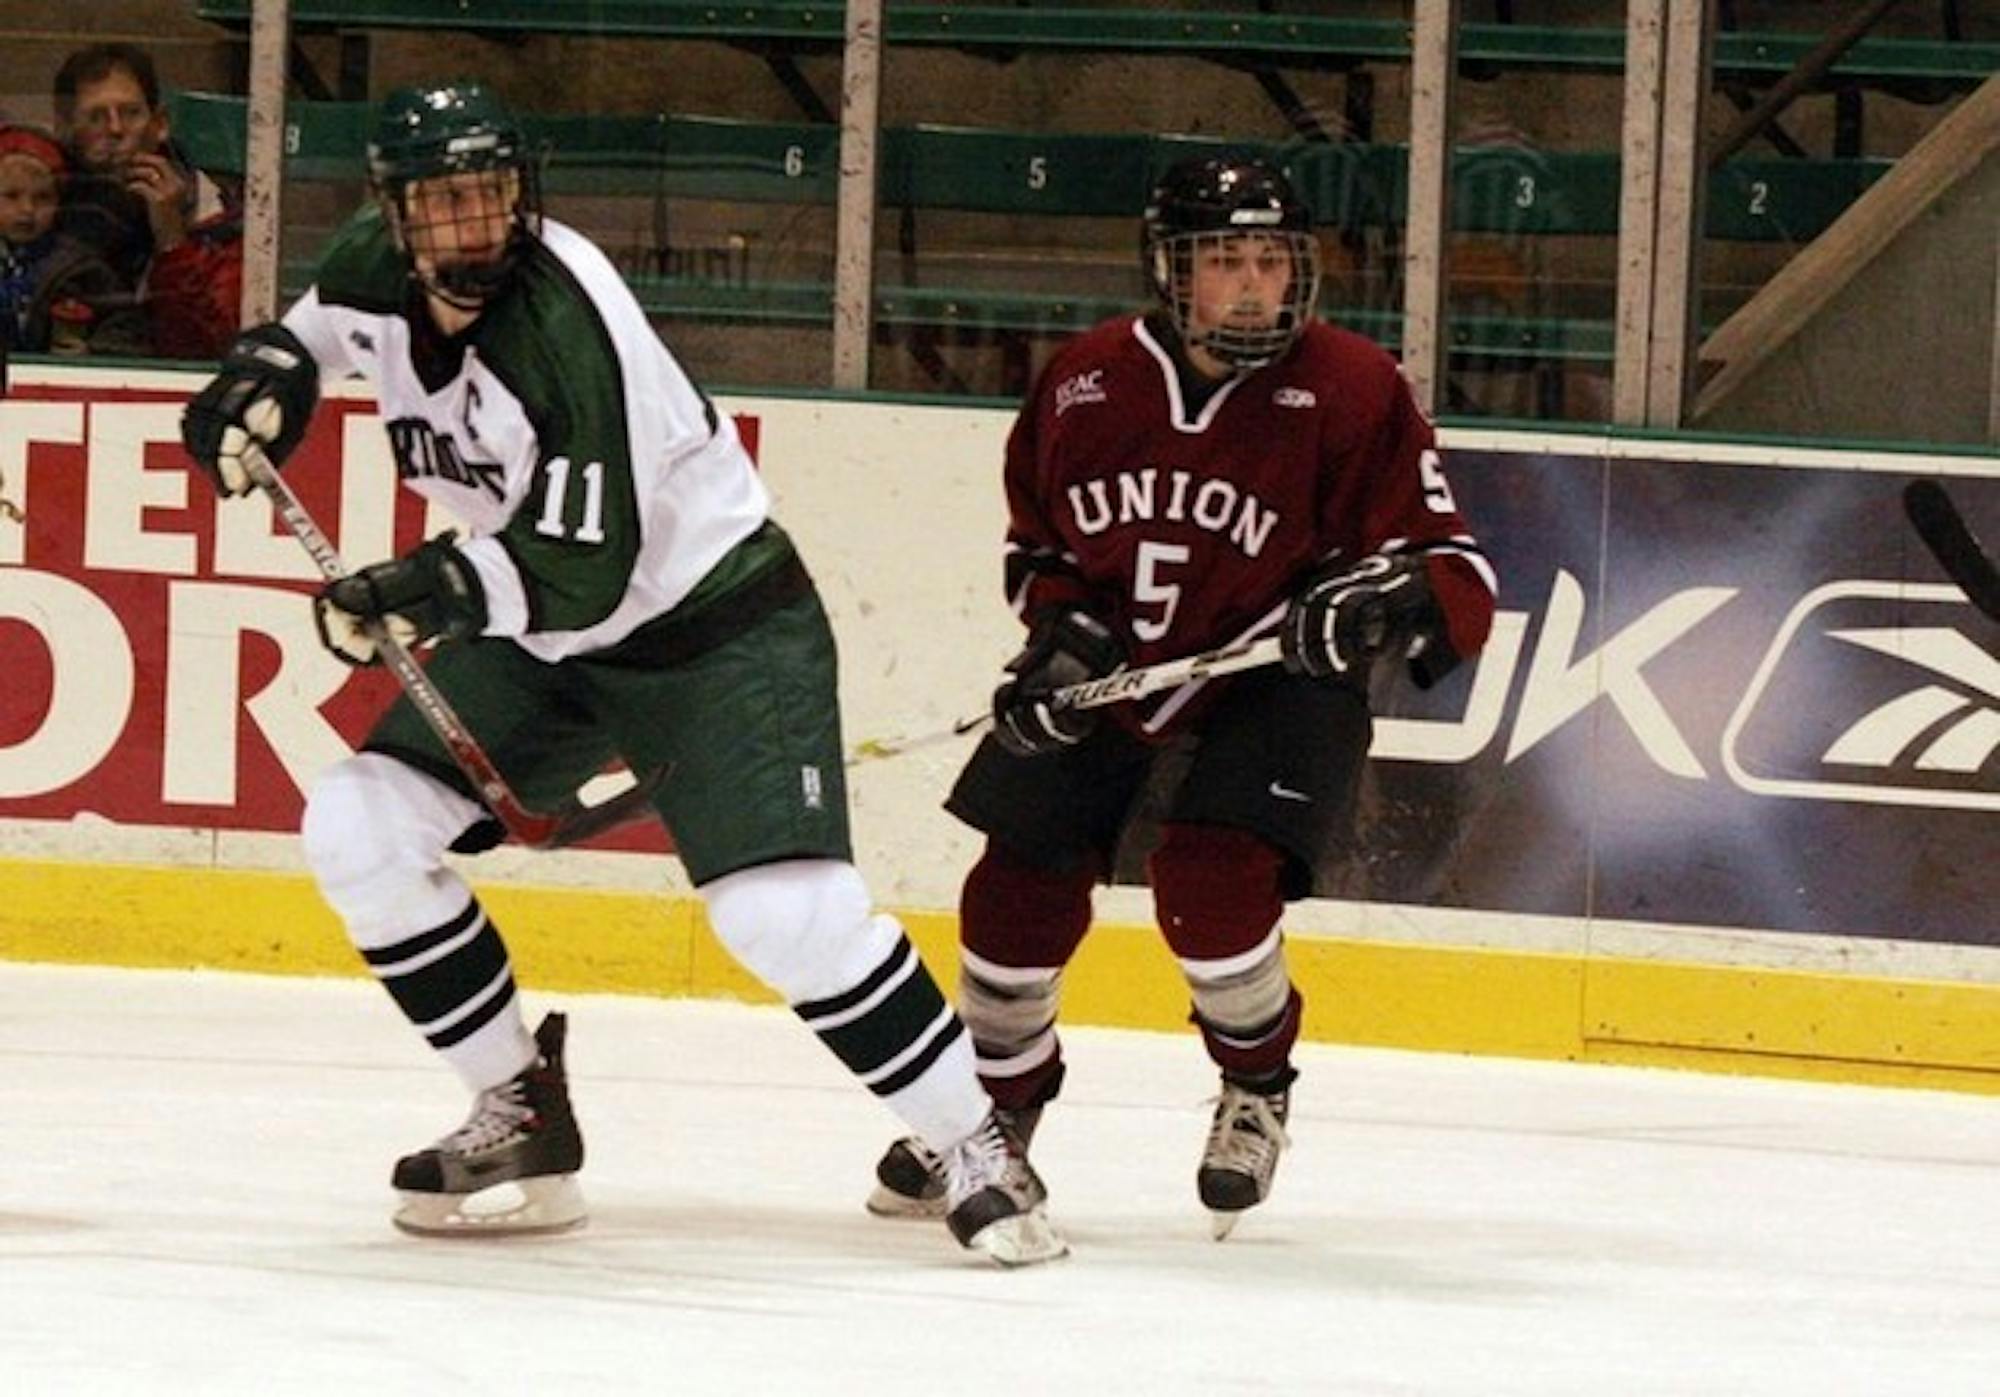 Women's hockey bounced back from a disappointing opening weekend with routs of Union and RPI.